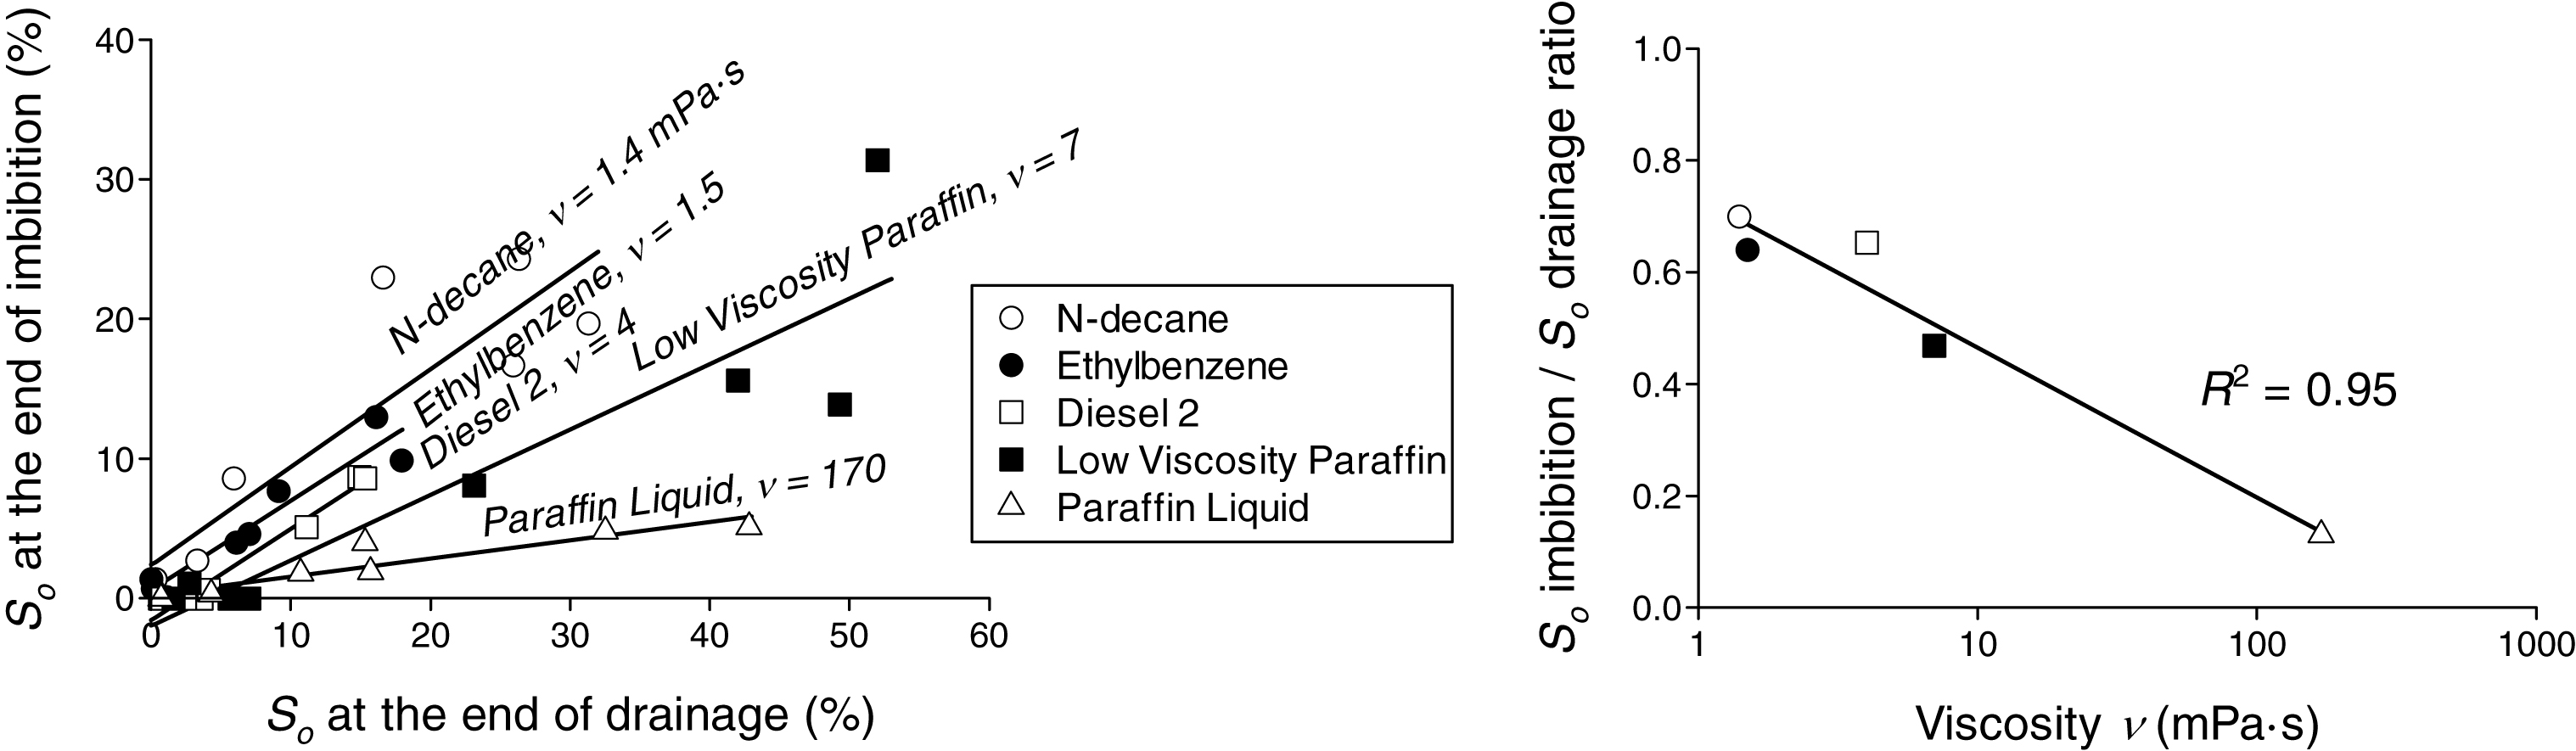 Comparison of residual saturation at the end of drainage and imbibition stages for 5 different NAPLs (left) and relationship between their viscosity and imbibition/drainage saturation ratio (right).